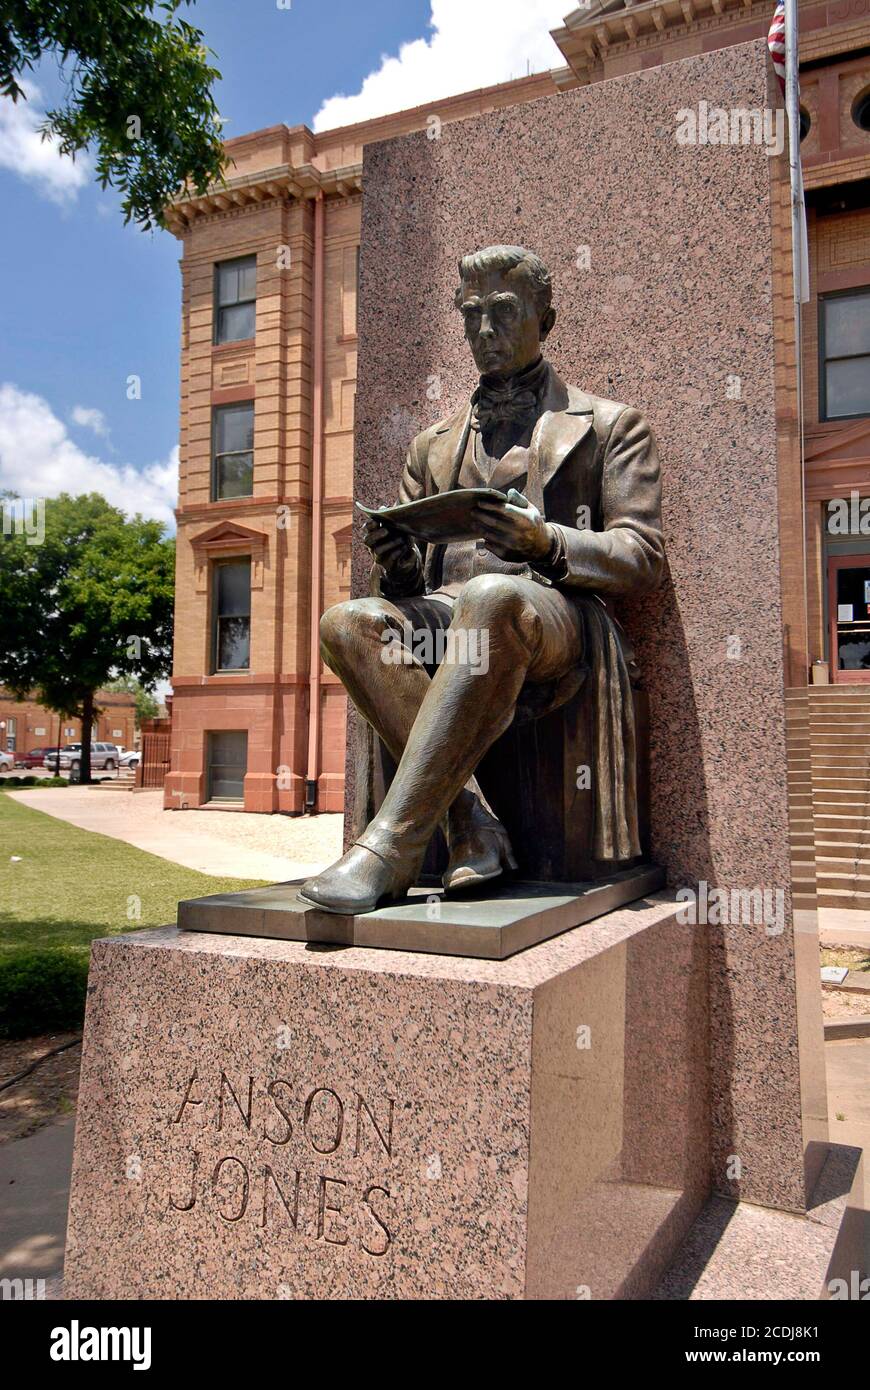 Anson, Texas, July 25, 2007: Courthouse, built in 1909, and square of Jones County, north of Abilene in north central Texas. Named for Anson Jones, president of the Republic of Texas. Italian-born American sculptor Enrico Cerracchoi created the statue. ©Bob Daemmrich Stock Photo